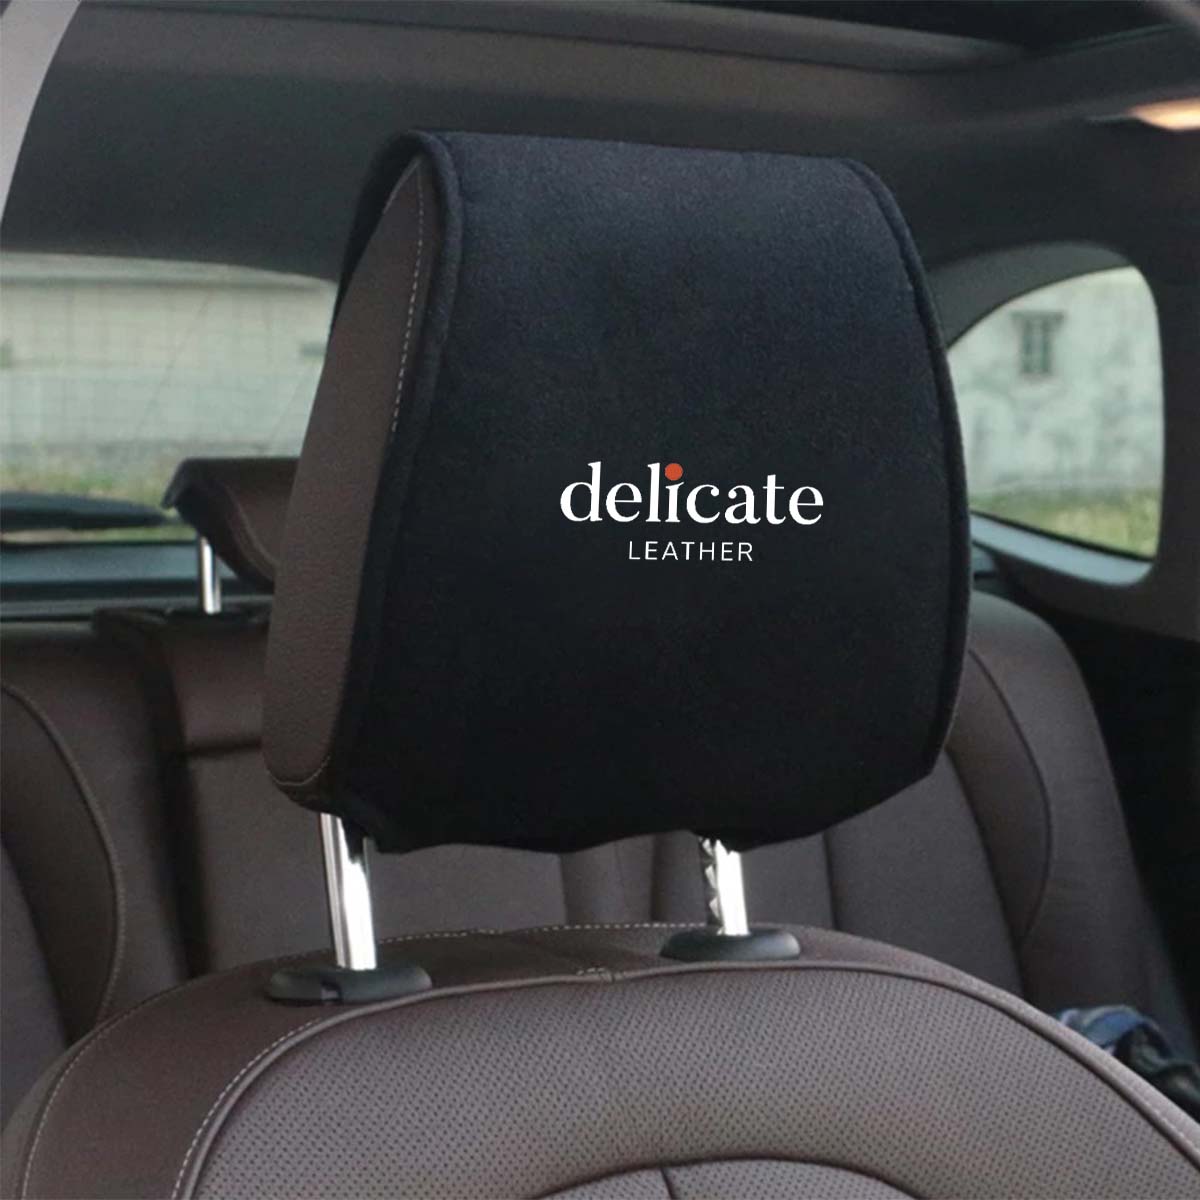 Infiniti Car Seat Headrest Cover: Stylish Protection for Your Vehicle's Headrests